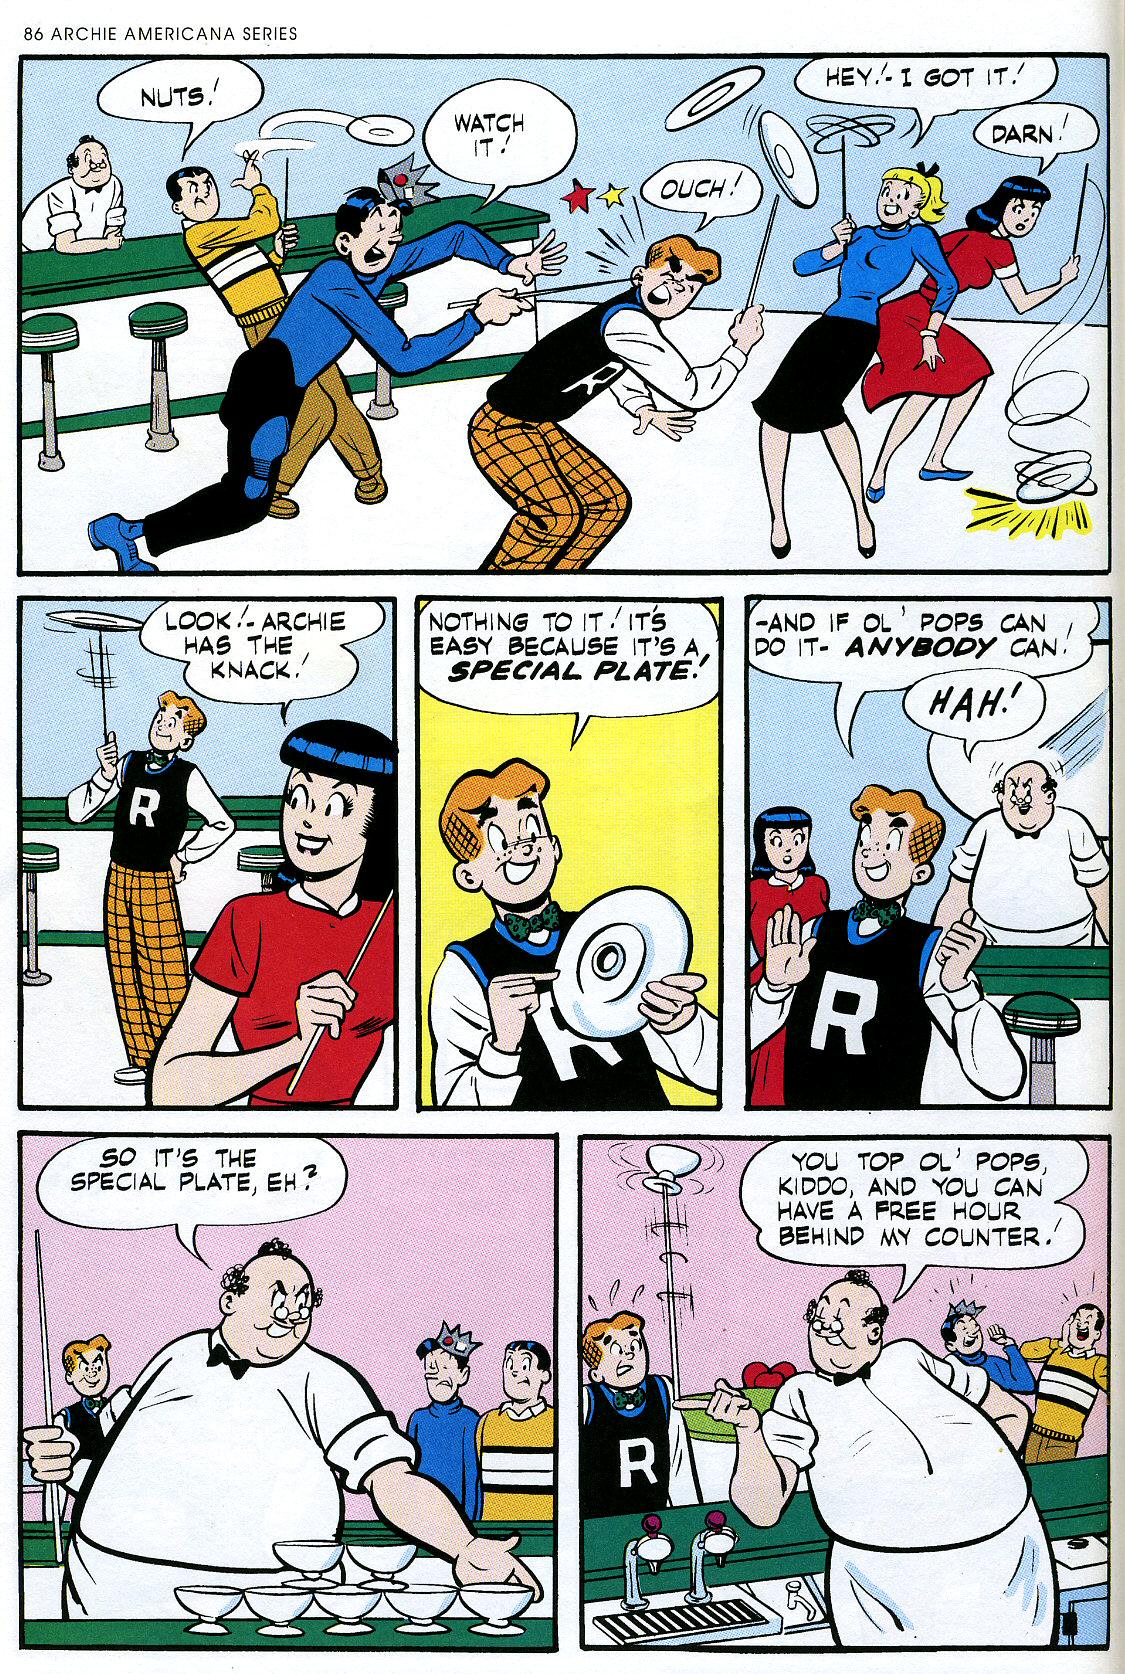 Read online Archie Americana Series comic -  Issue # TPB 2 - 88